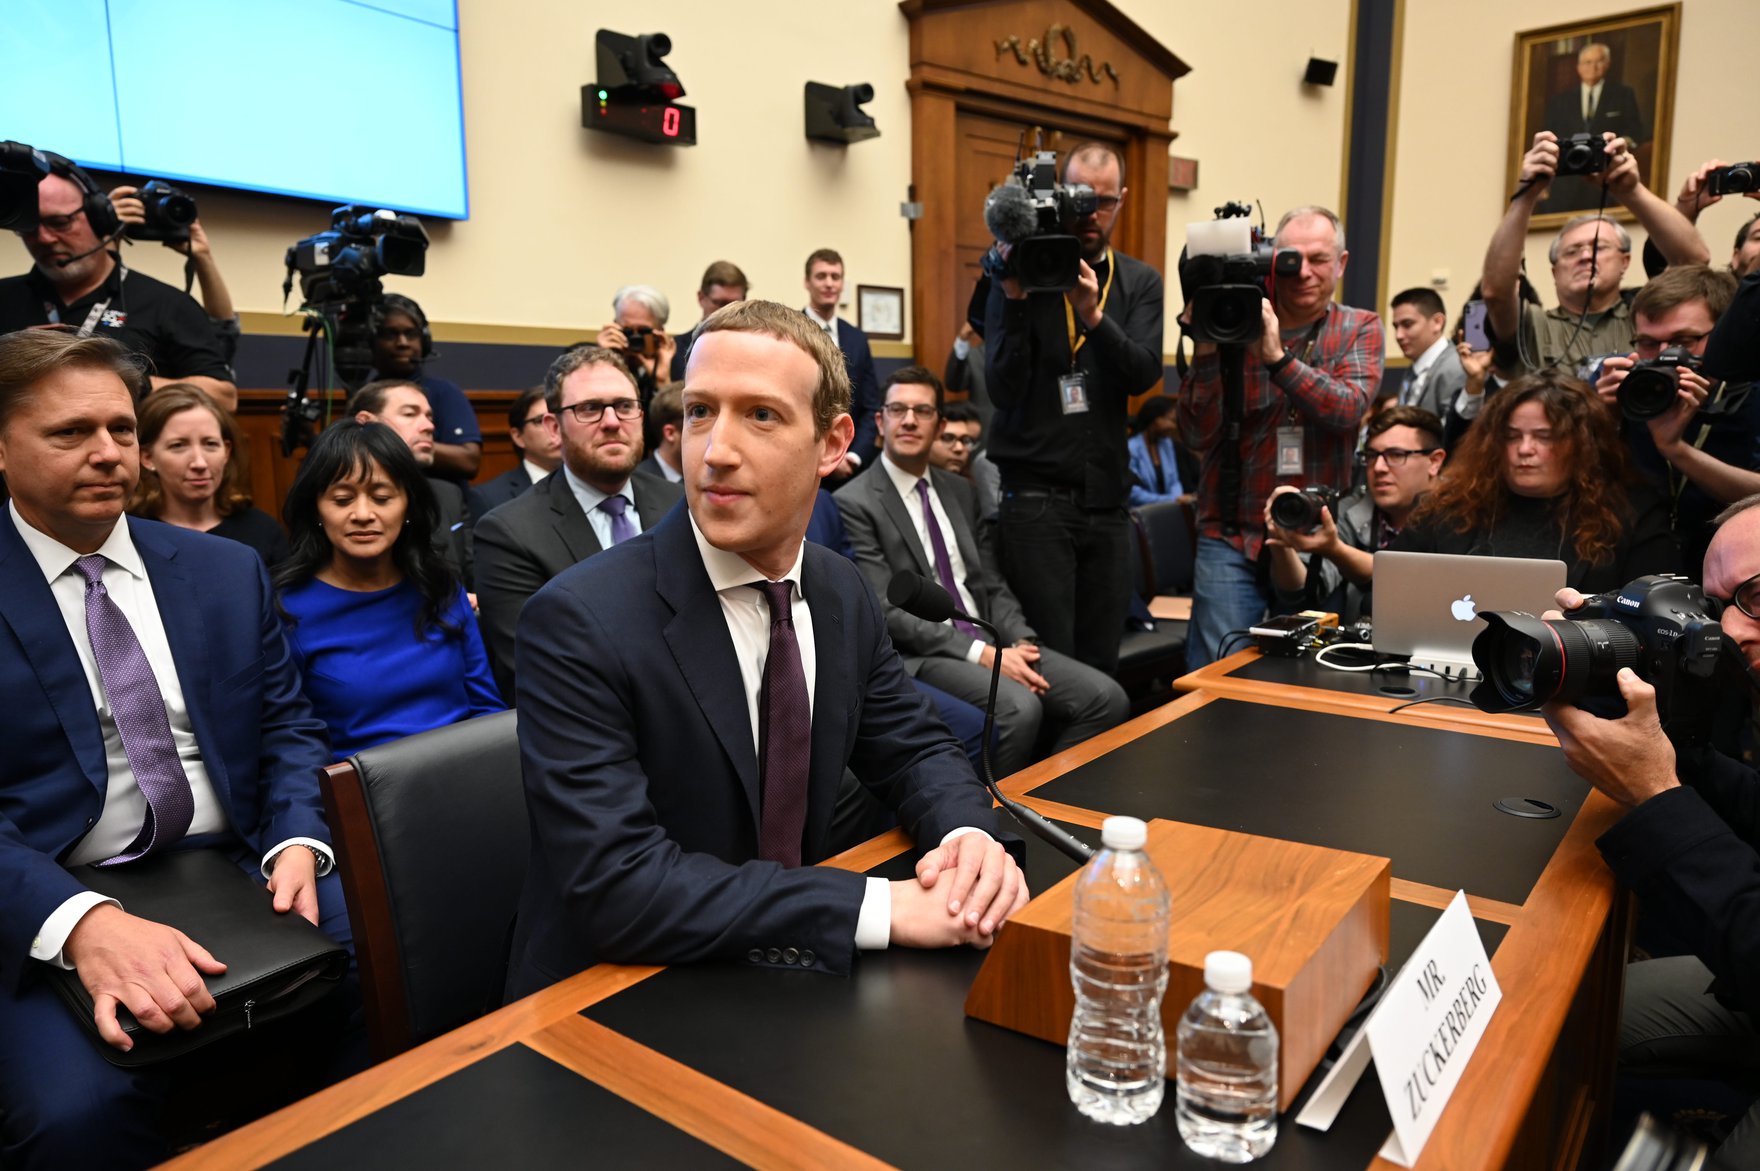 2019-10-23T143655Z_1339942028_MT1USATODAY13556705_RTRMADP_3_FACEBOOK-CEO-MARK-ZUCKERBERG-ARRIVES-TO-TESTIFY-BEFORE-THE.JPG